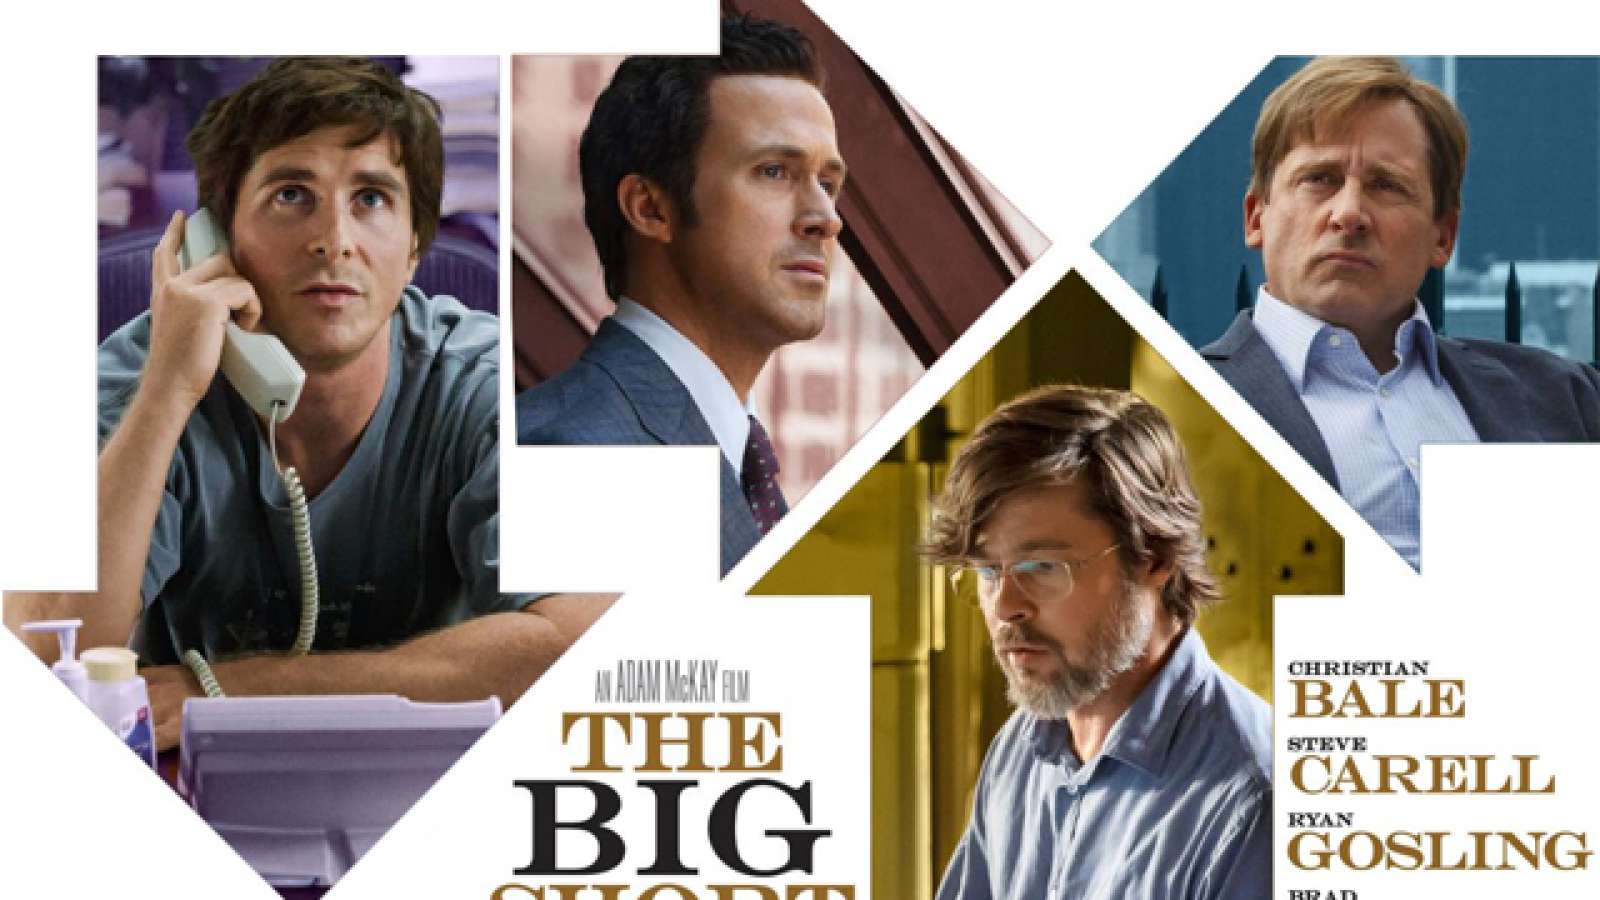 The Big Short – Film Review and Analysis